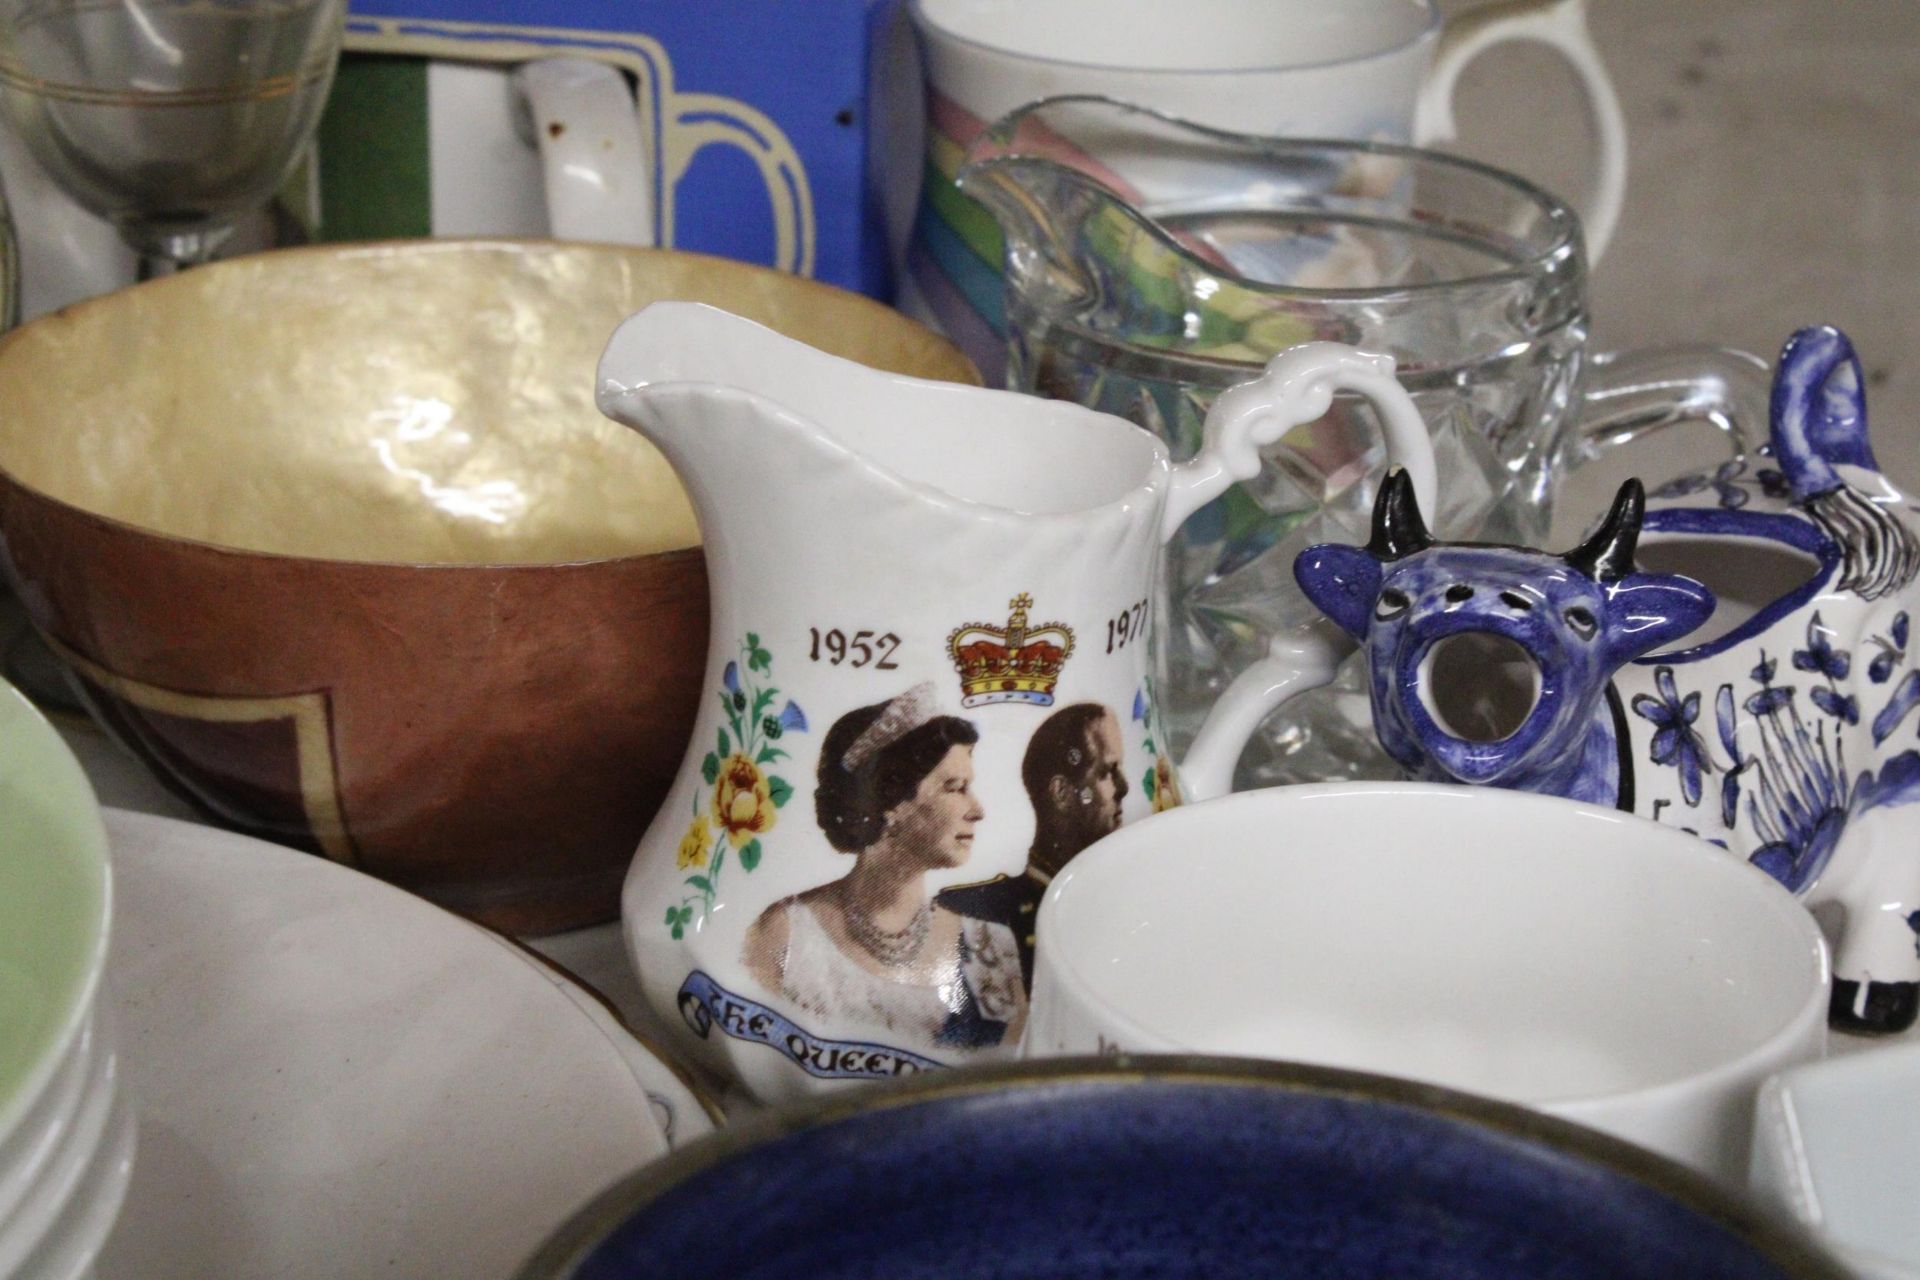 A MIXED LOT TO INCLUDE ELIZABETHAN MUGS "OVER THE RAINBOW" ORIENTAL GINGER JAR, GLASSWARE, MILK - Image 5 of 6